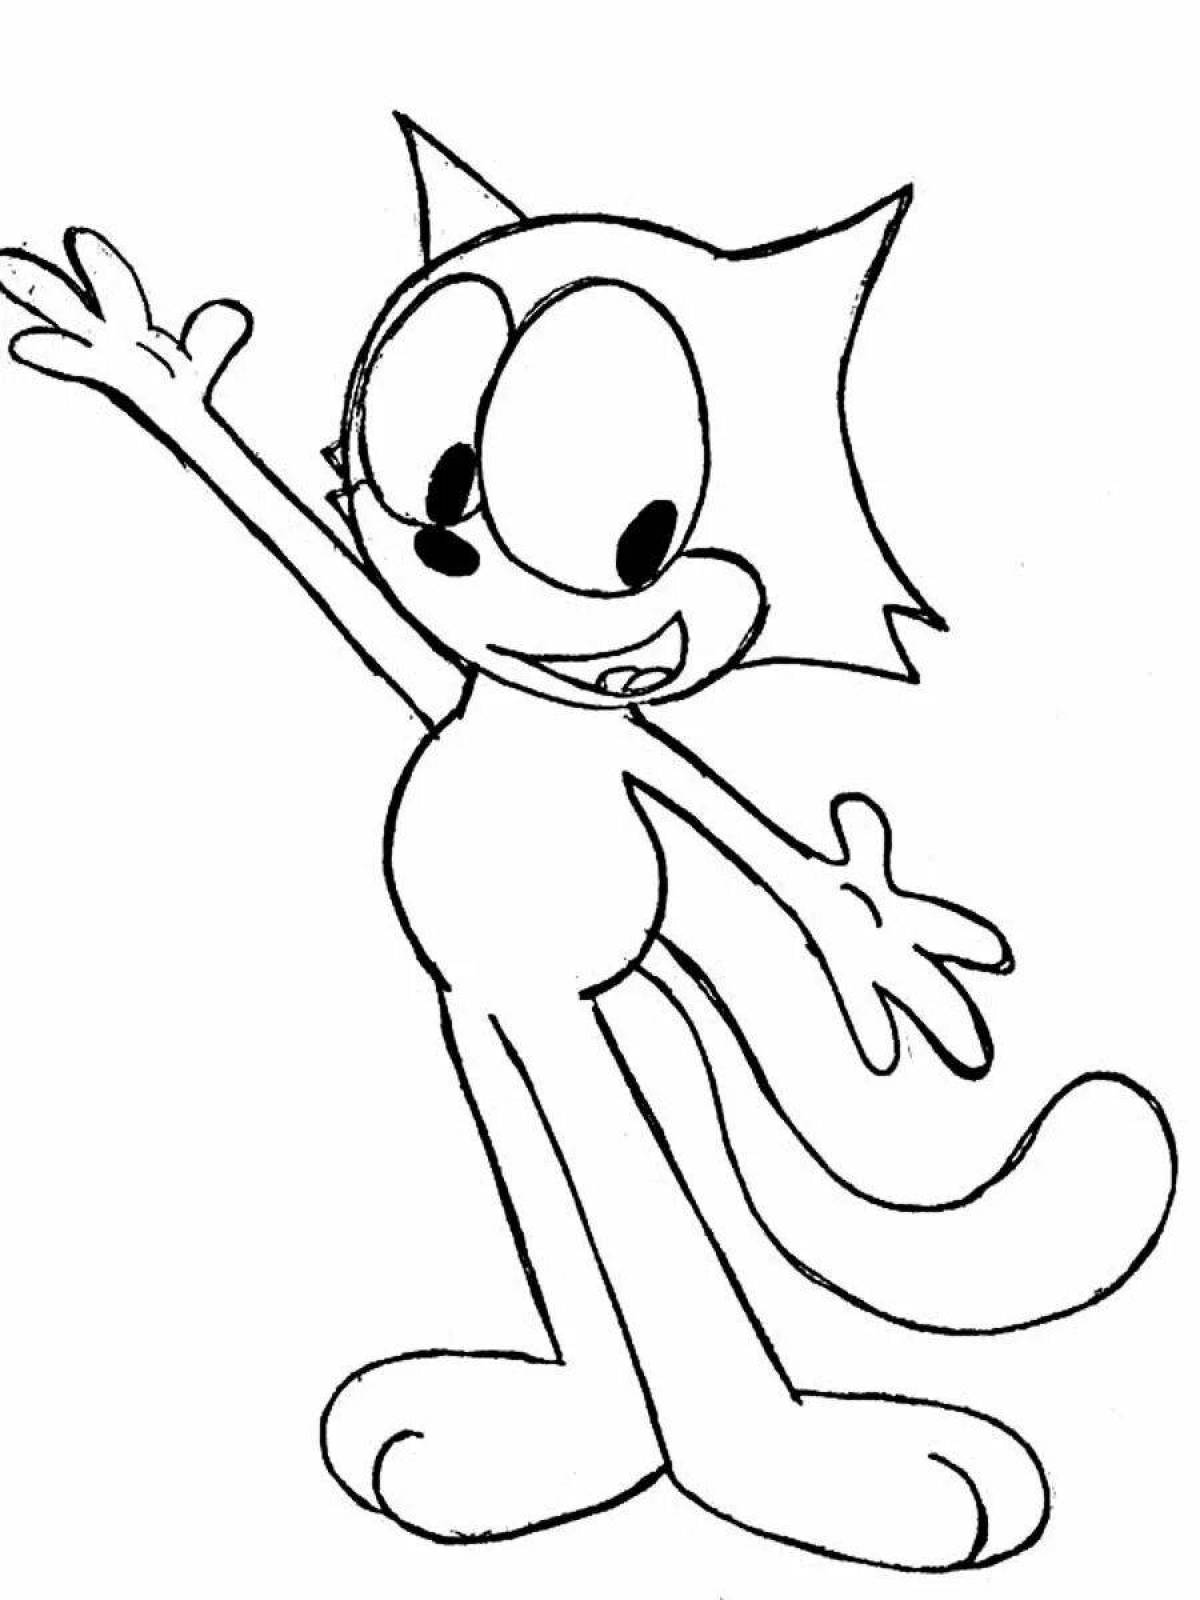 Felix the Cat's playful coloring page